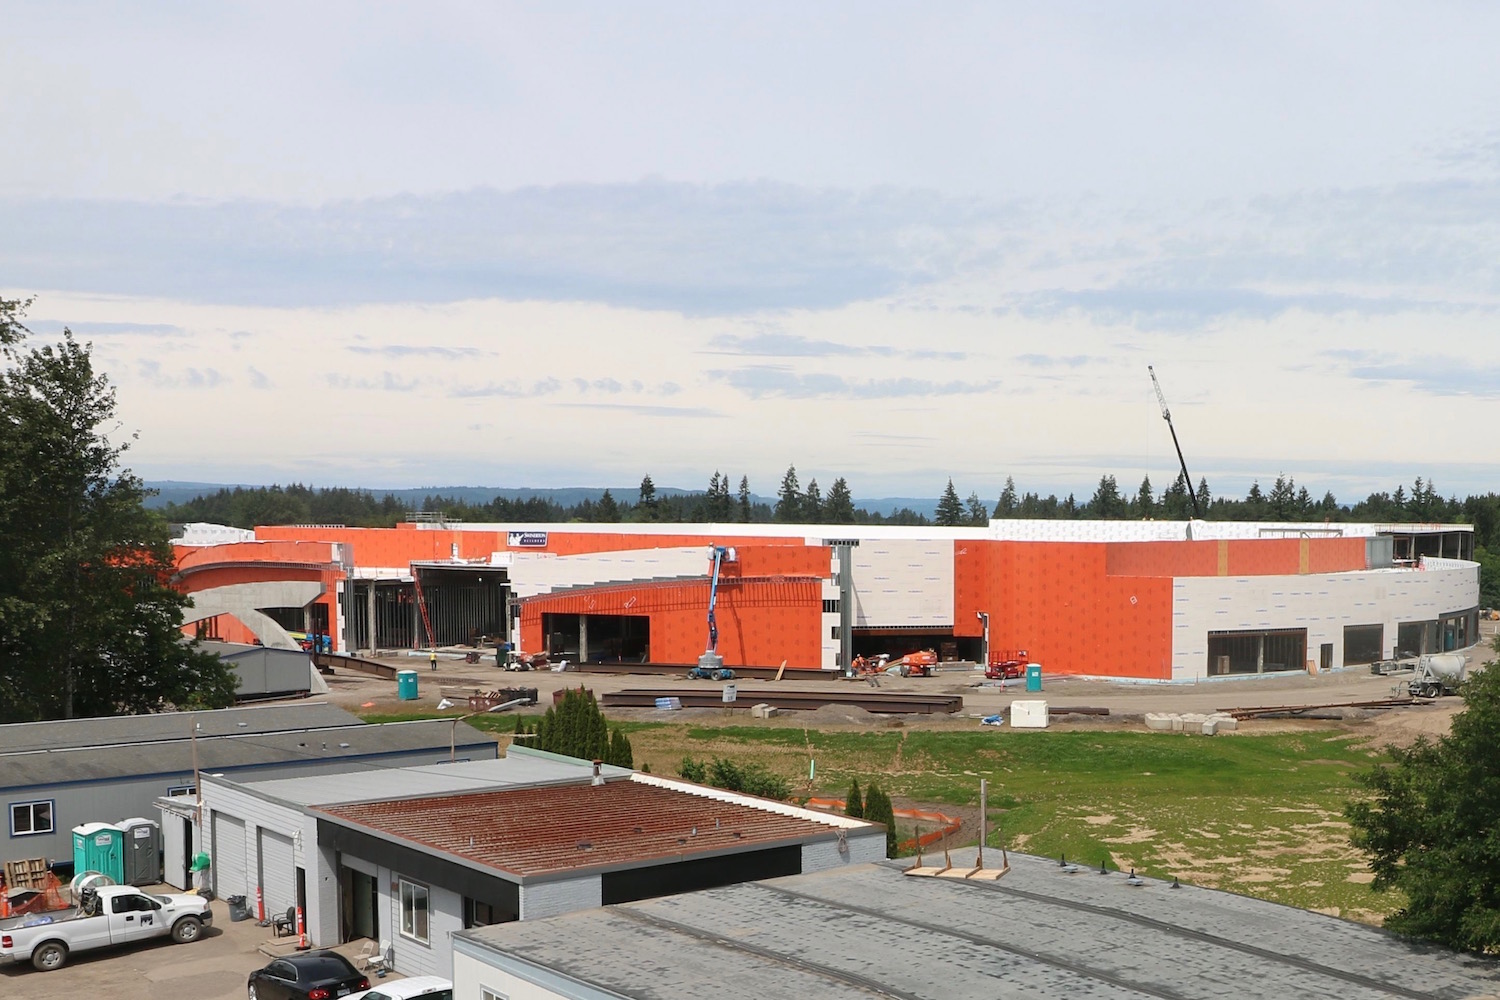 Cowlitz Tribe in discussions with county about stance on casino